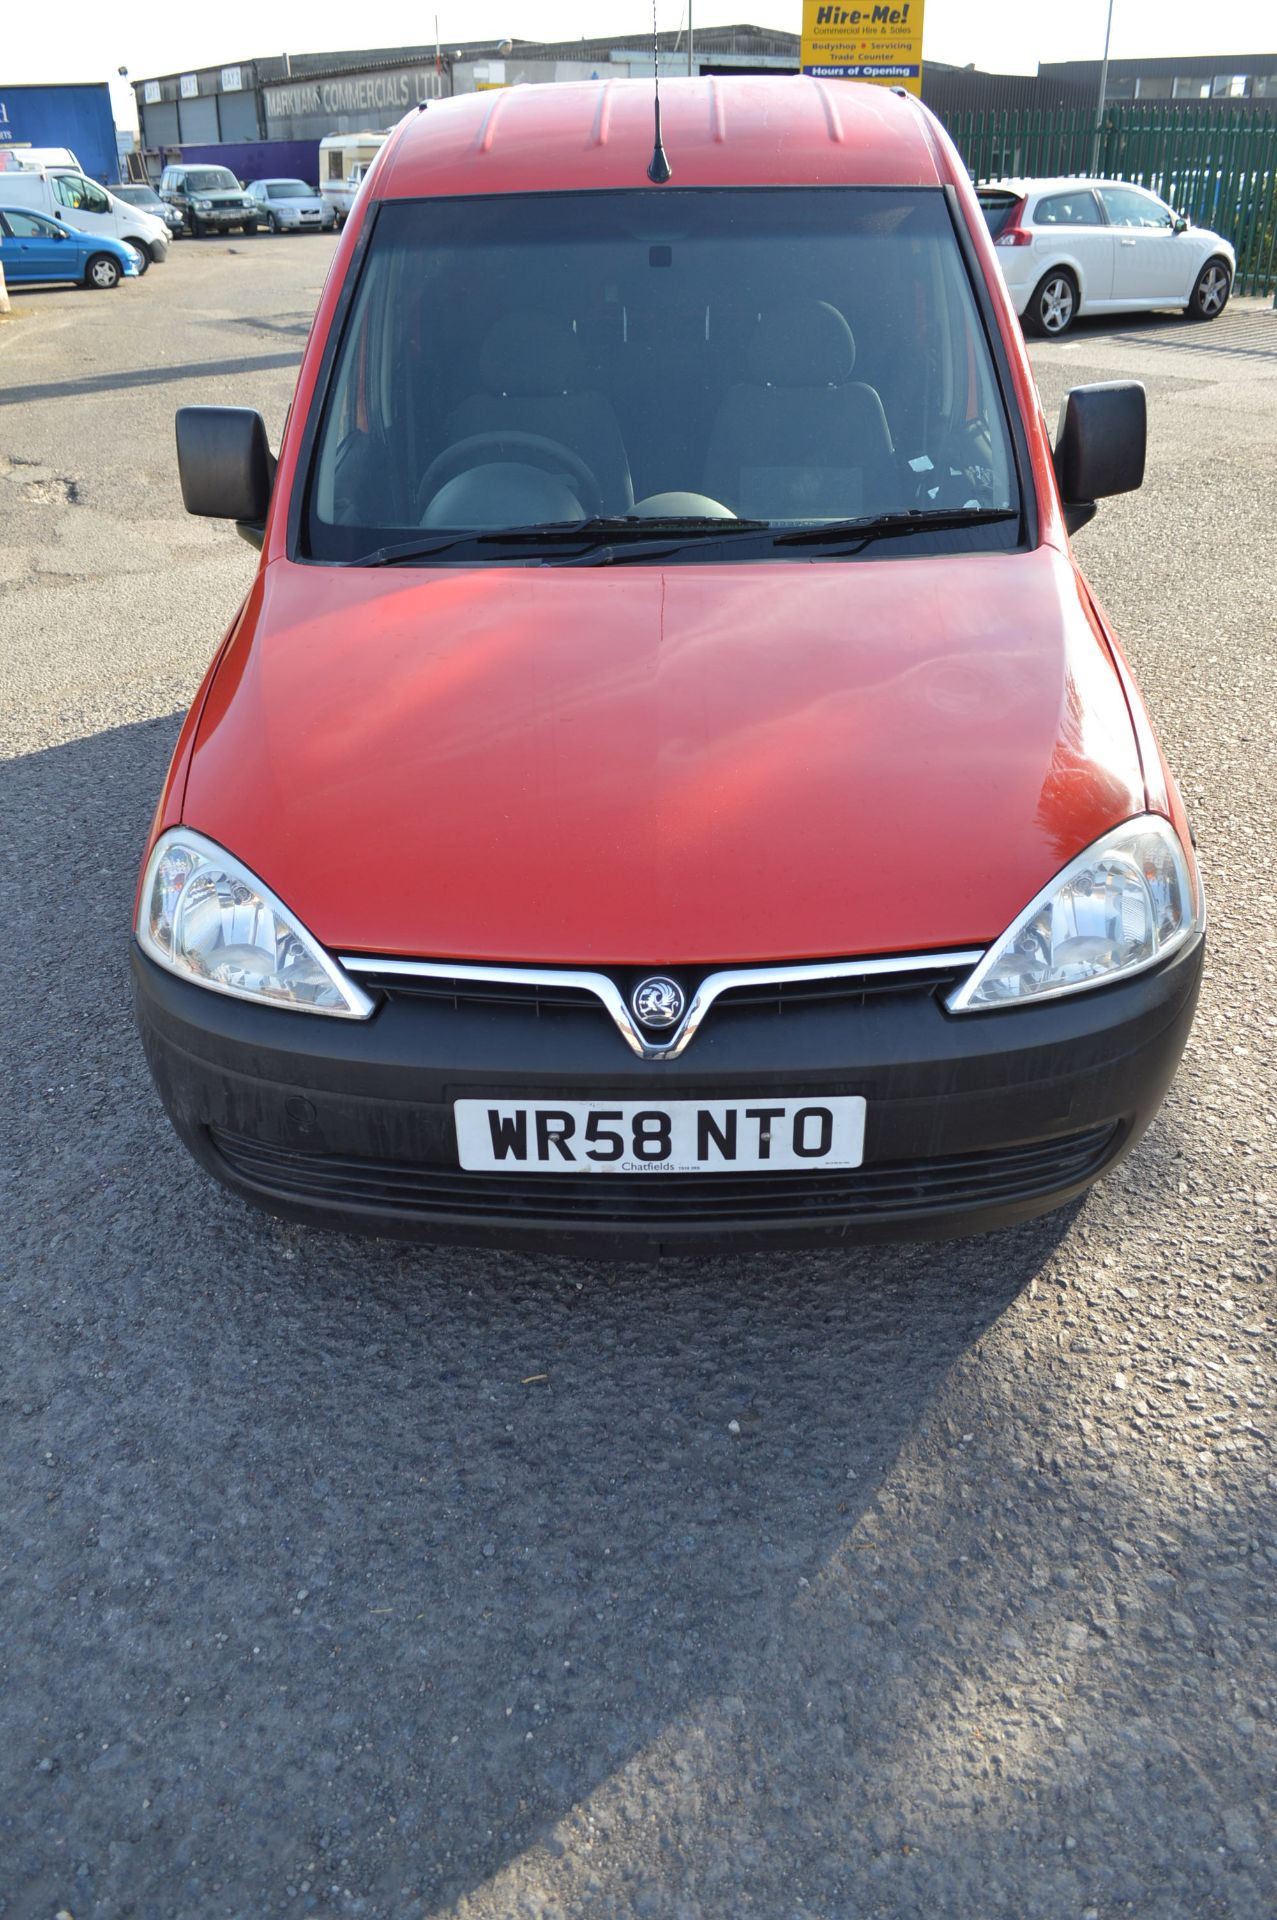 2008/58 REG VAUXHALL COMBO CDTI SWB CREW VAN - 1 OWNER FROM NEW, ROYAL MAIL *NO VAT* - Image 2 of 18